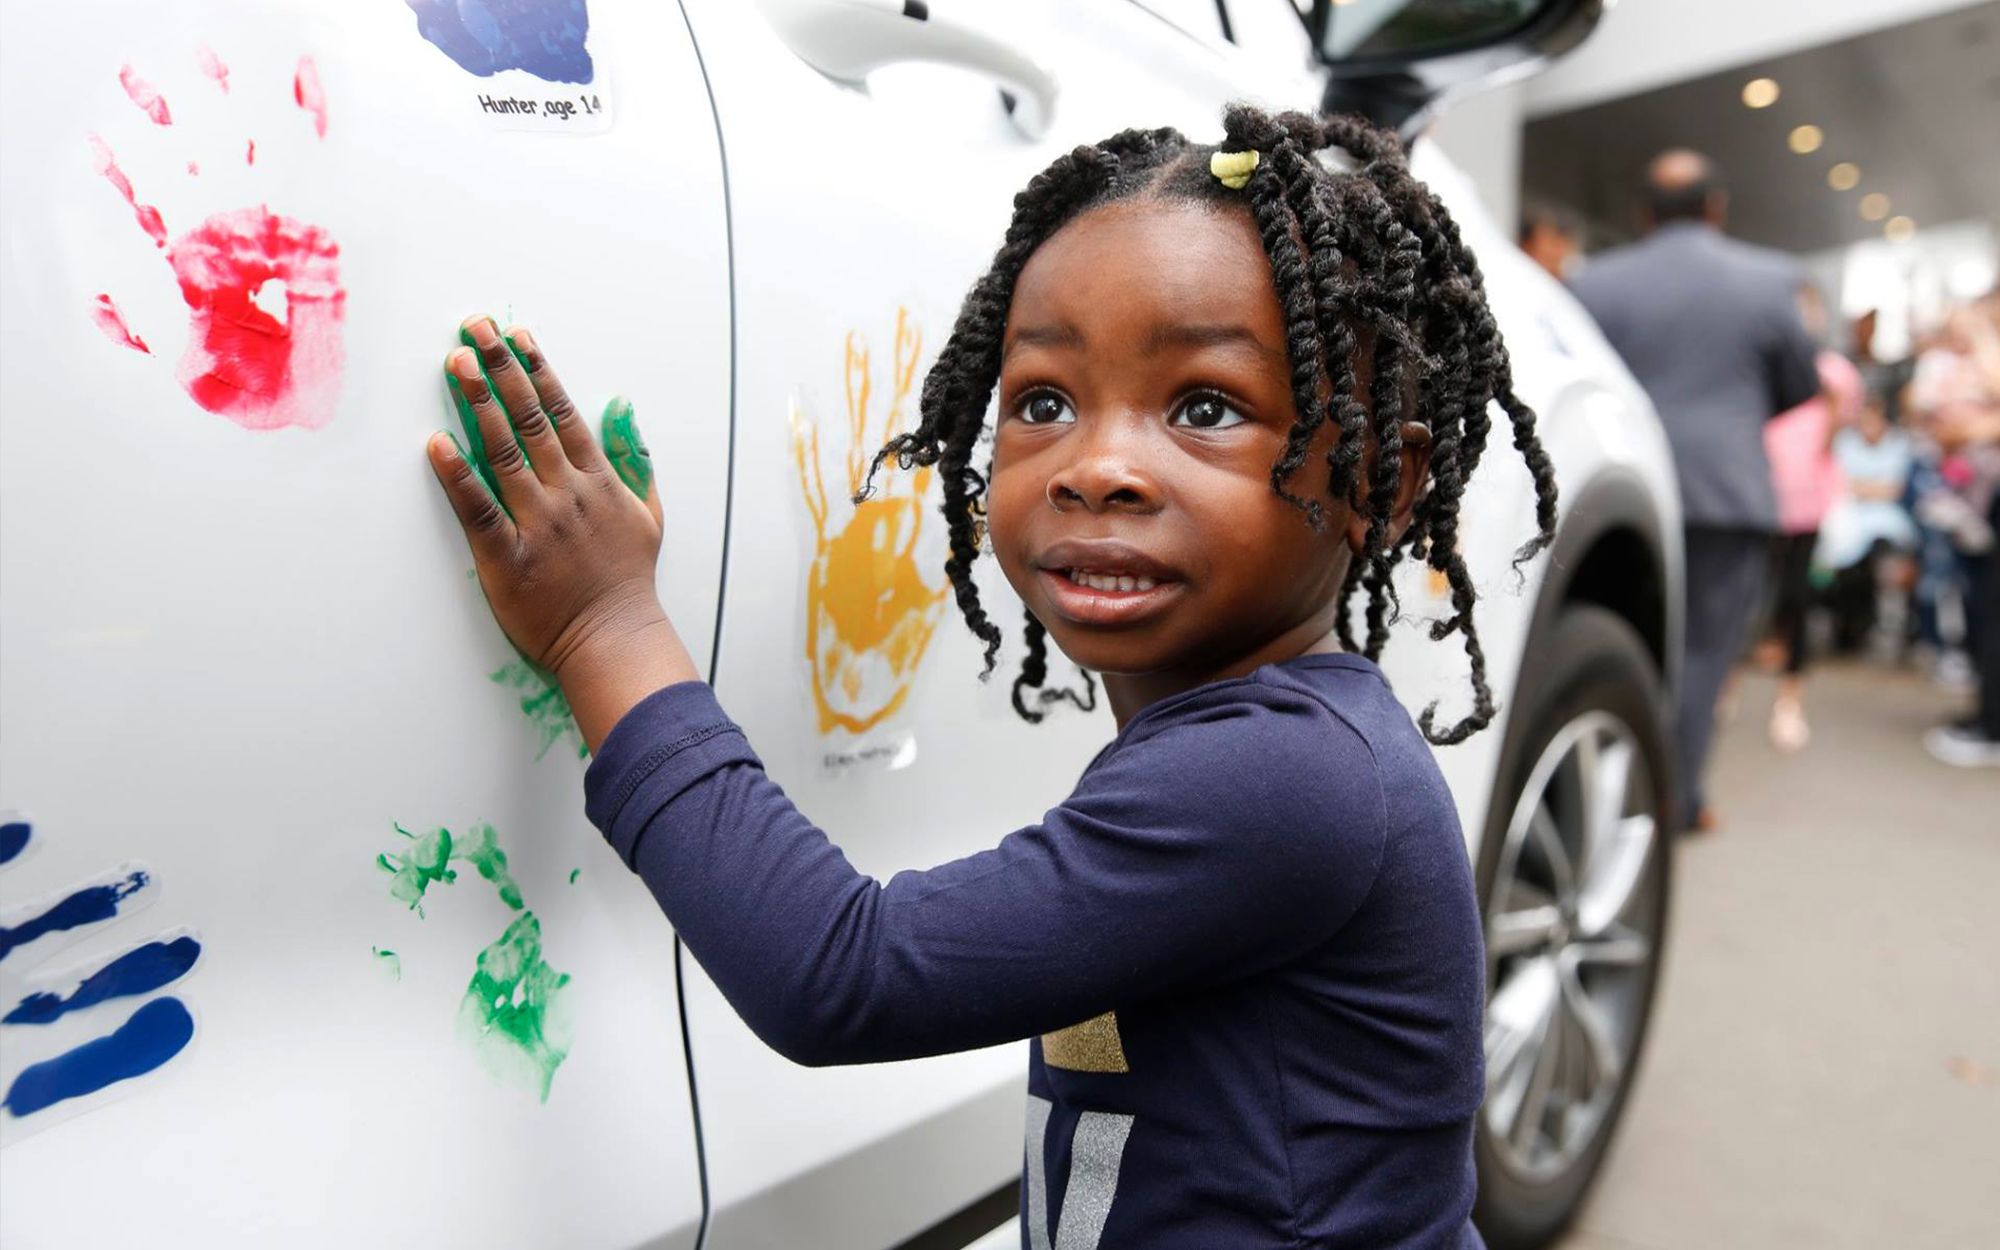 Little girl stamps her handprint with green paint on a Hyundai car during a Hope on Wheels event